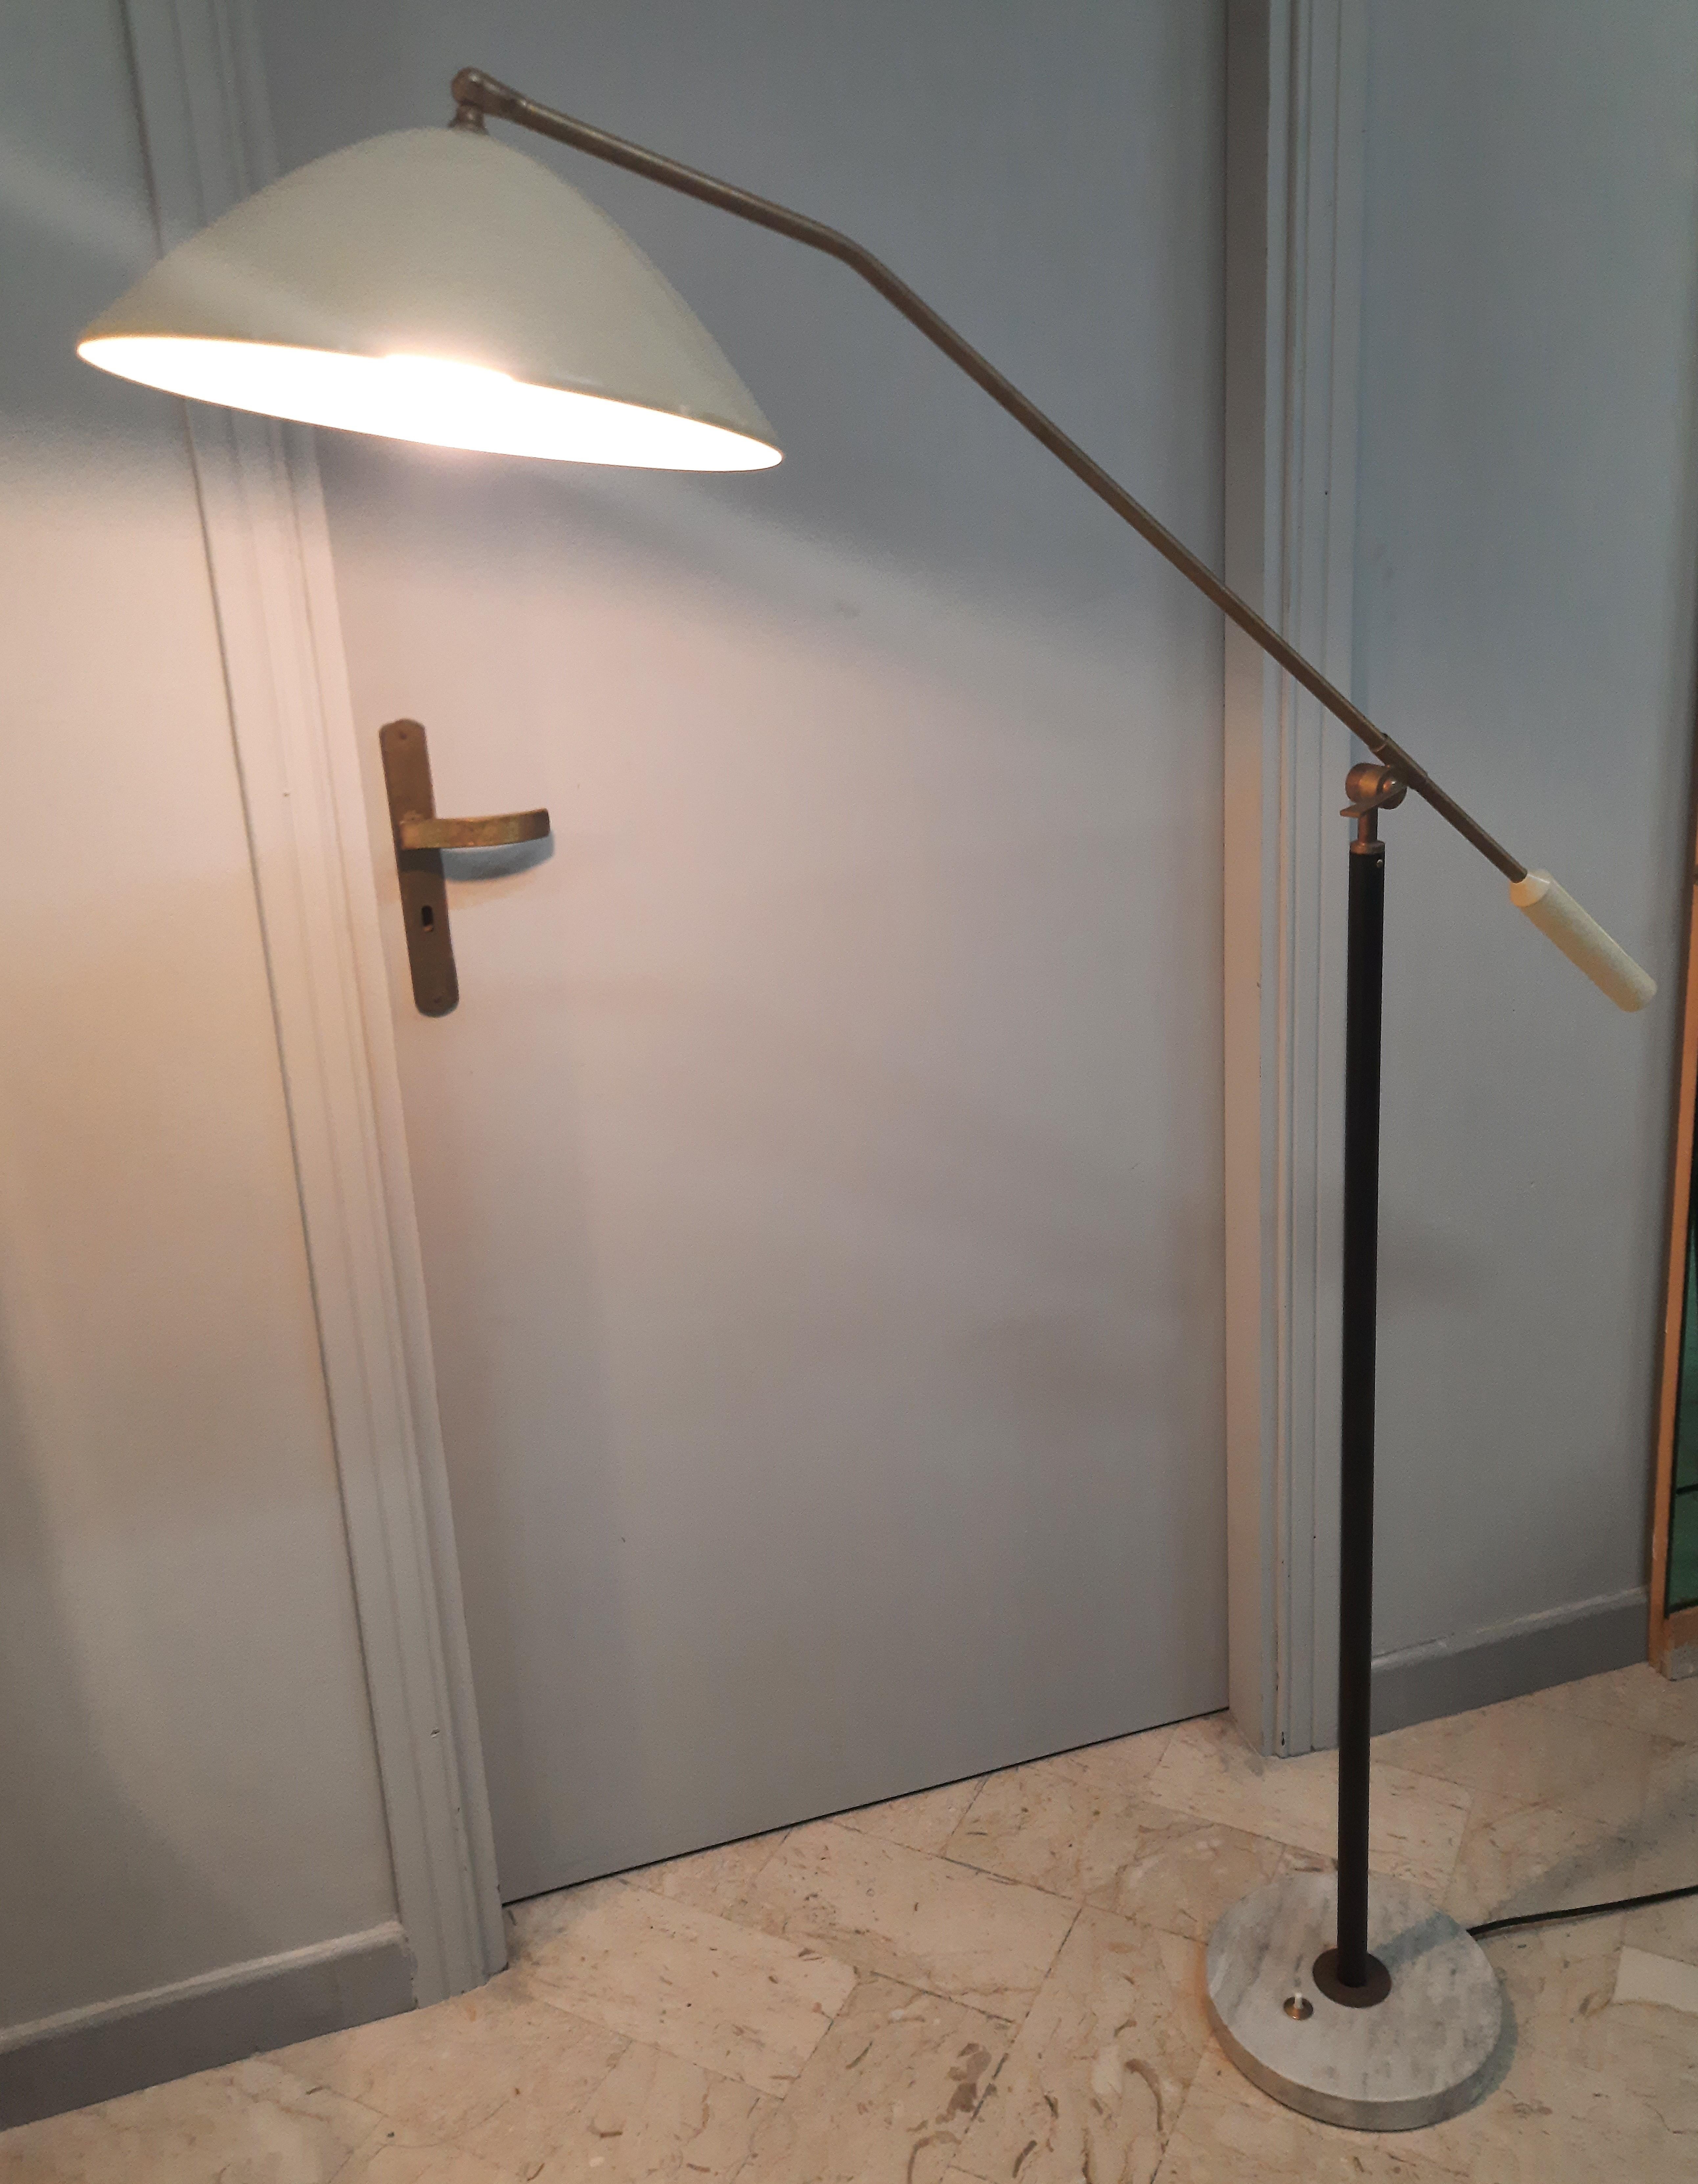 Direntable and adjustable floor lamp. Painted metal lampshade, brass frame with marble base. Good conditions. Working order. 1950s approximately. The diameter of the lampshade is 35cm, the open shade measures about 186cm.